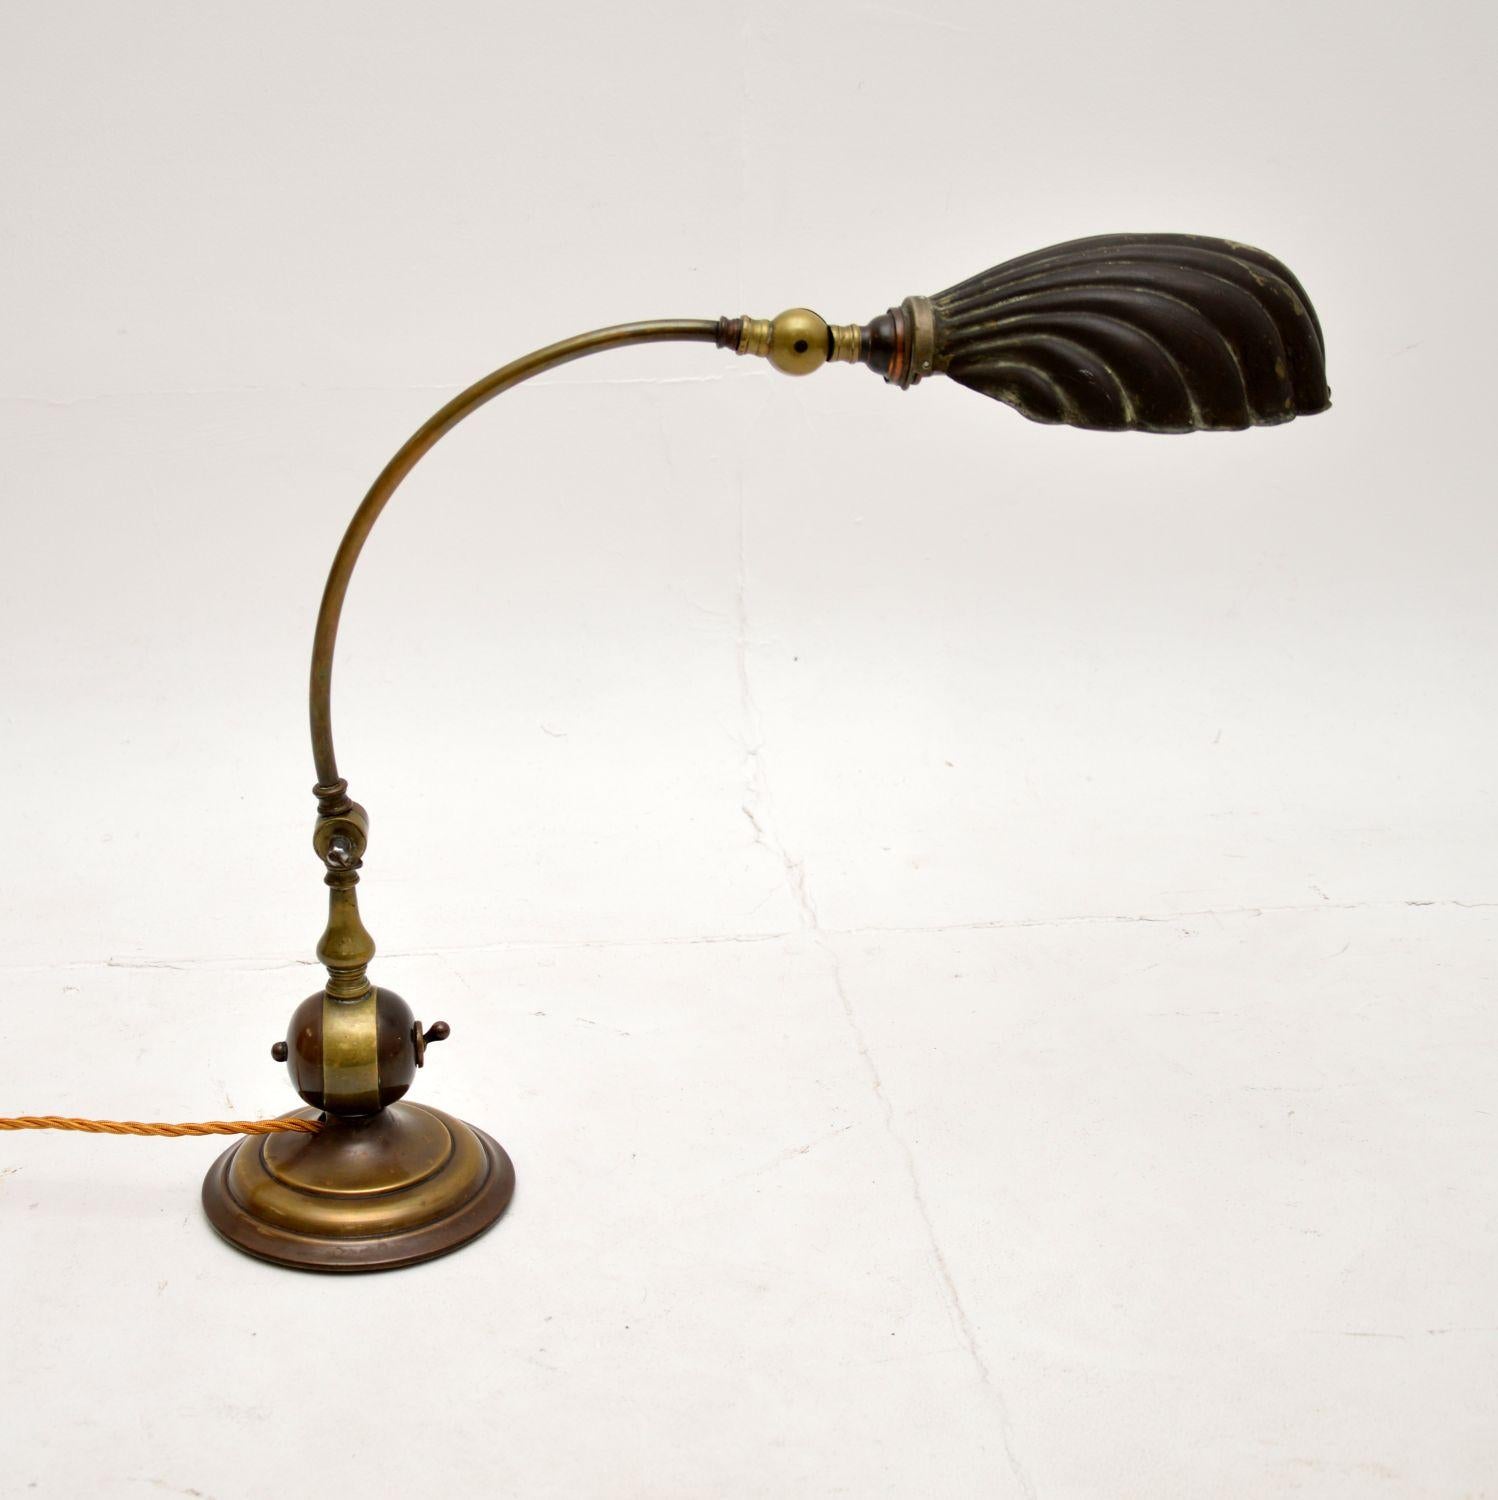 A beautiful antique brass clam shell bankers desk lamp. This was made in England, it dates from around the 1920-30’s.

It is of superb quality with a lovely design. The angle can be adjusted with joints at the neck and base, the shade can also